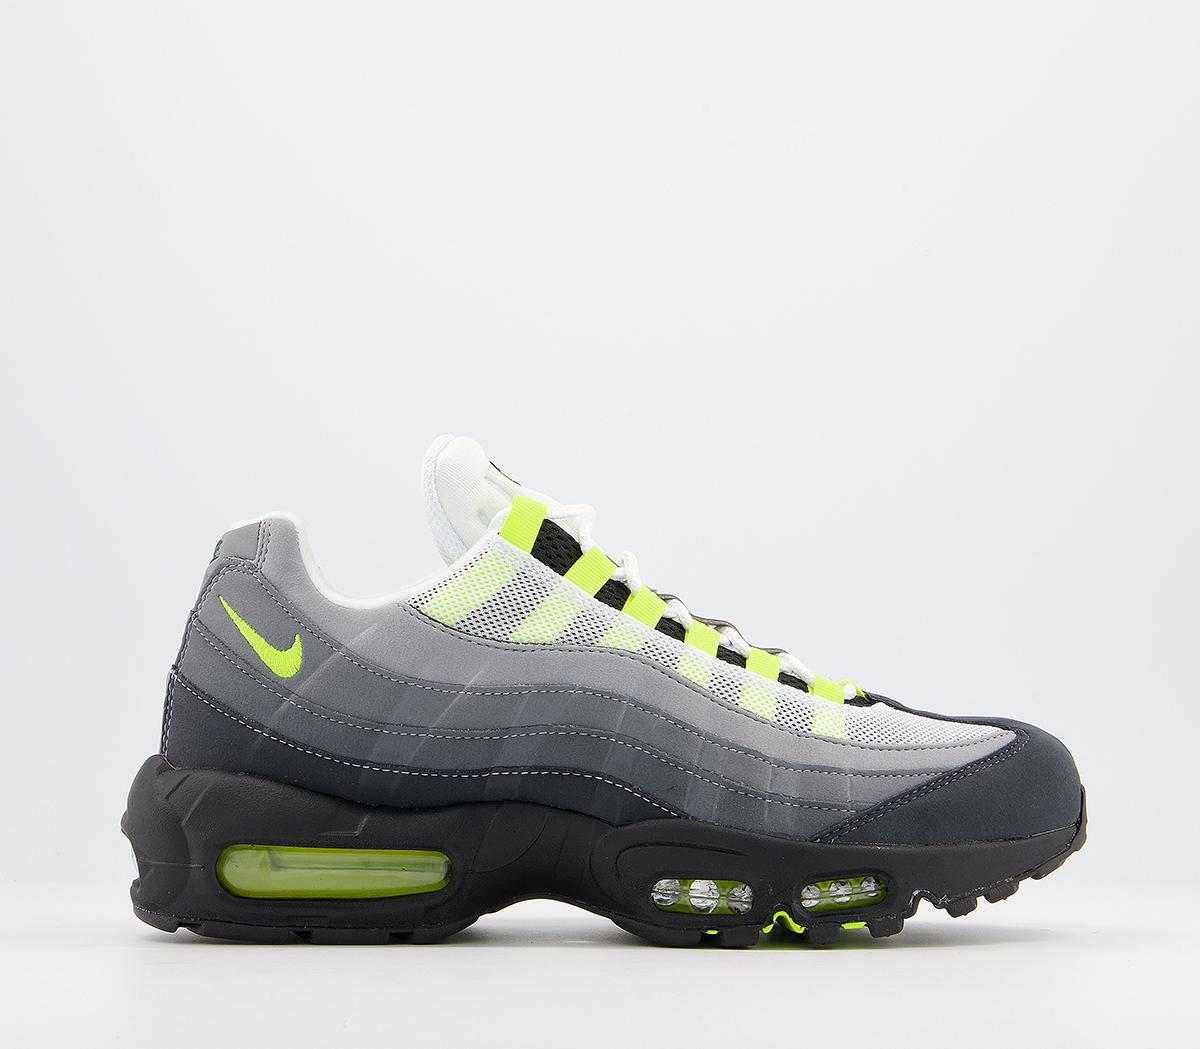 NikeAir Max 95 TrainersBlack Neon Yellow Light Graphite Light Charcoal An